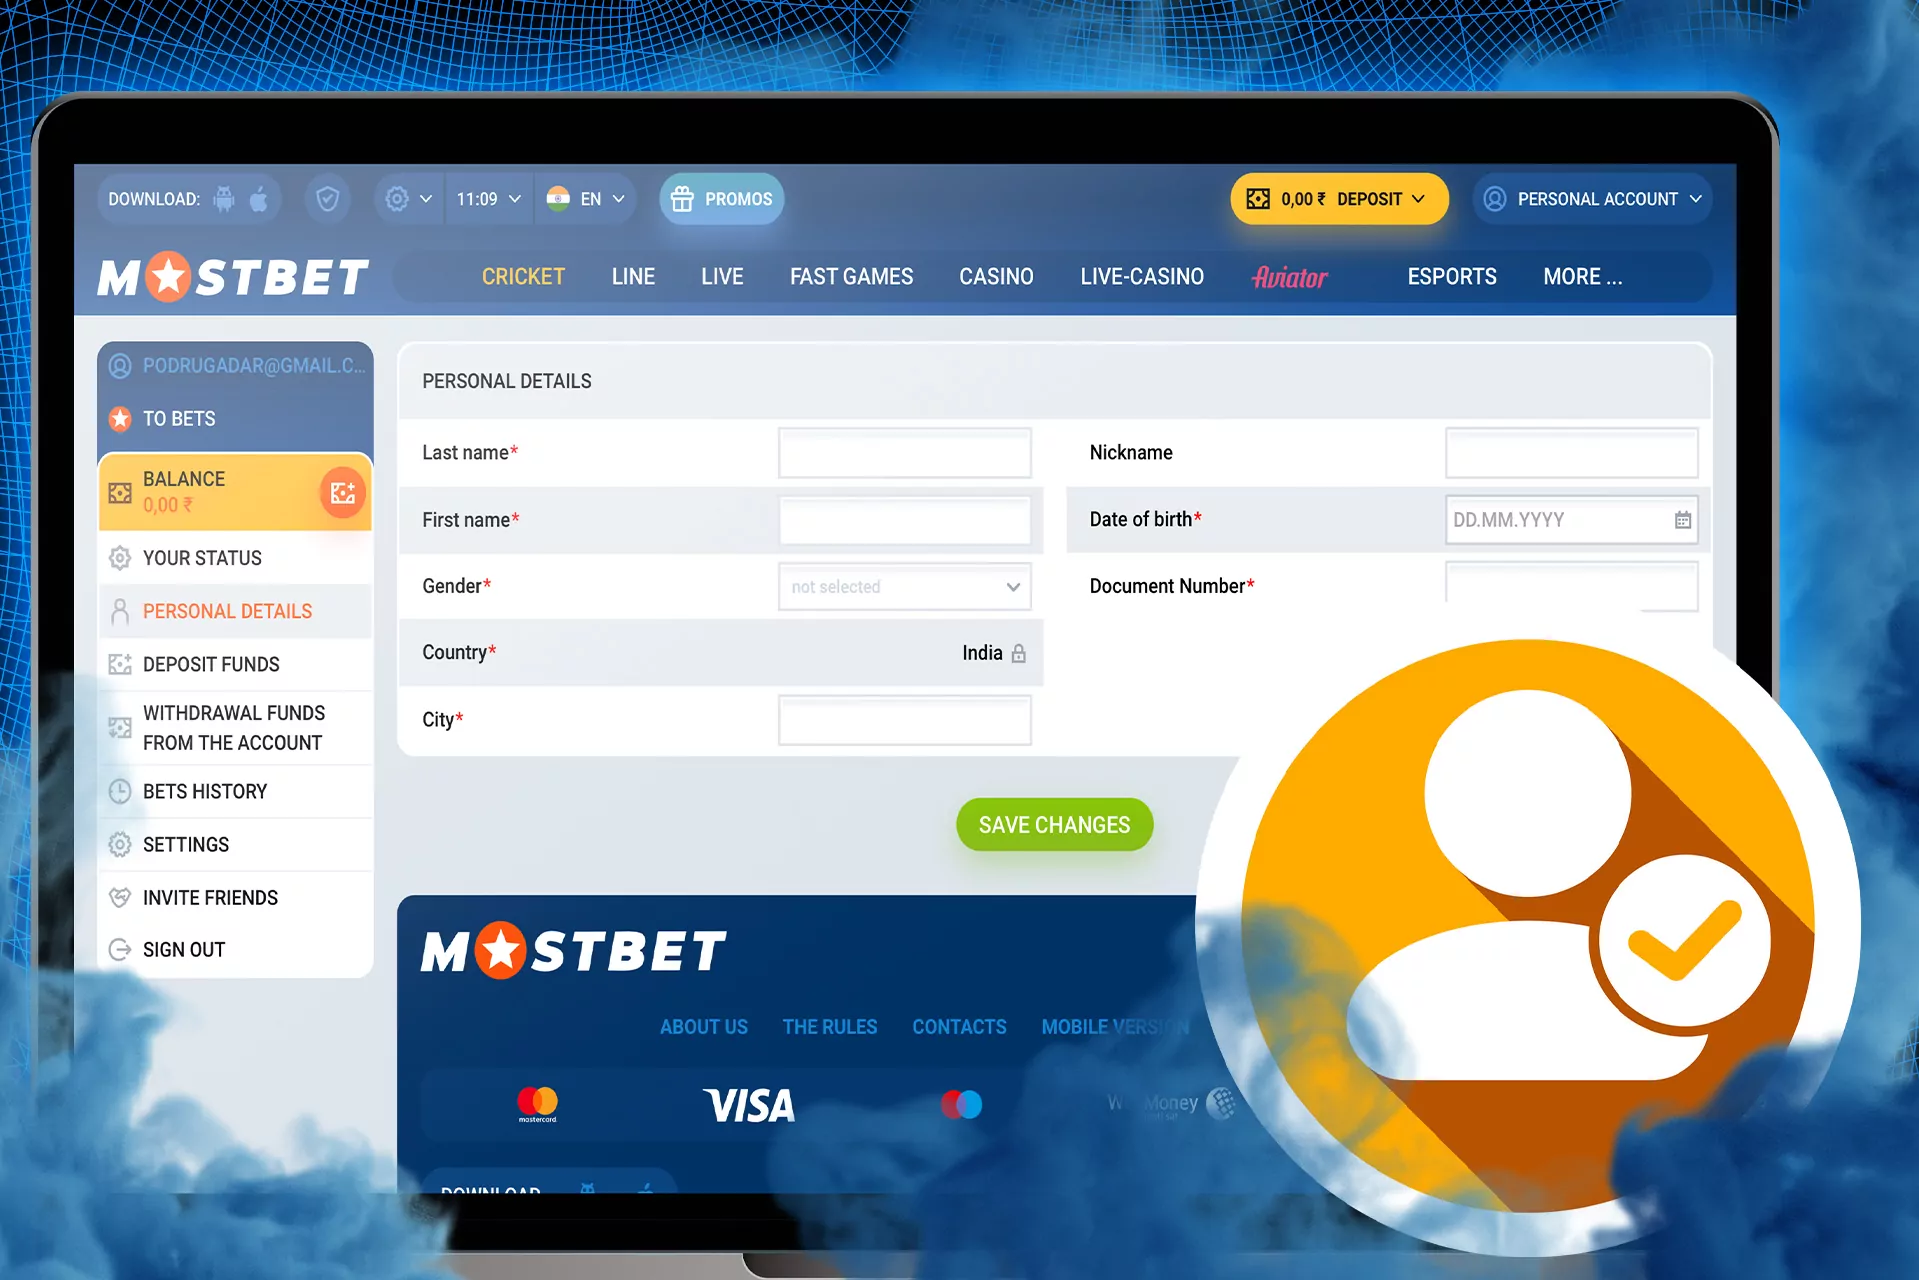 Confirm your identity through Mostbet verification and bet safely.